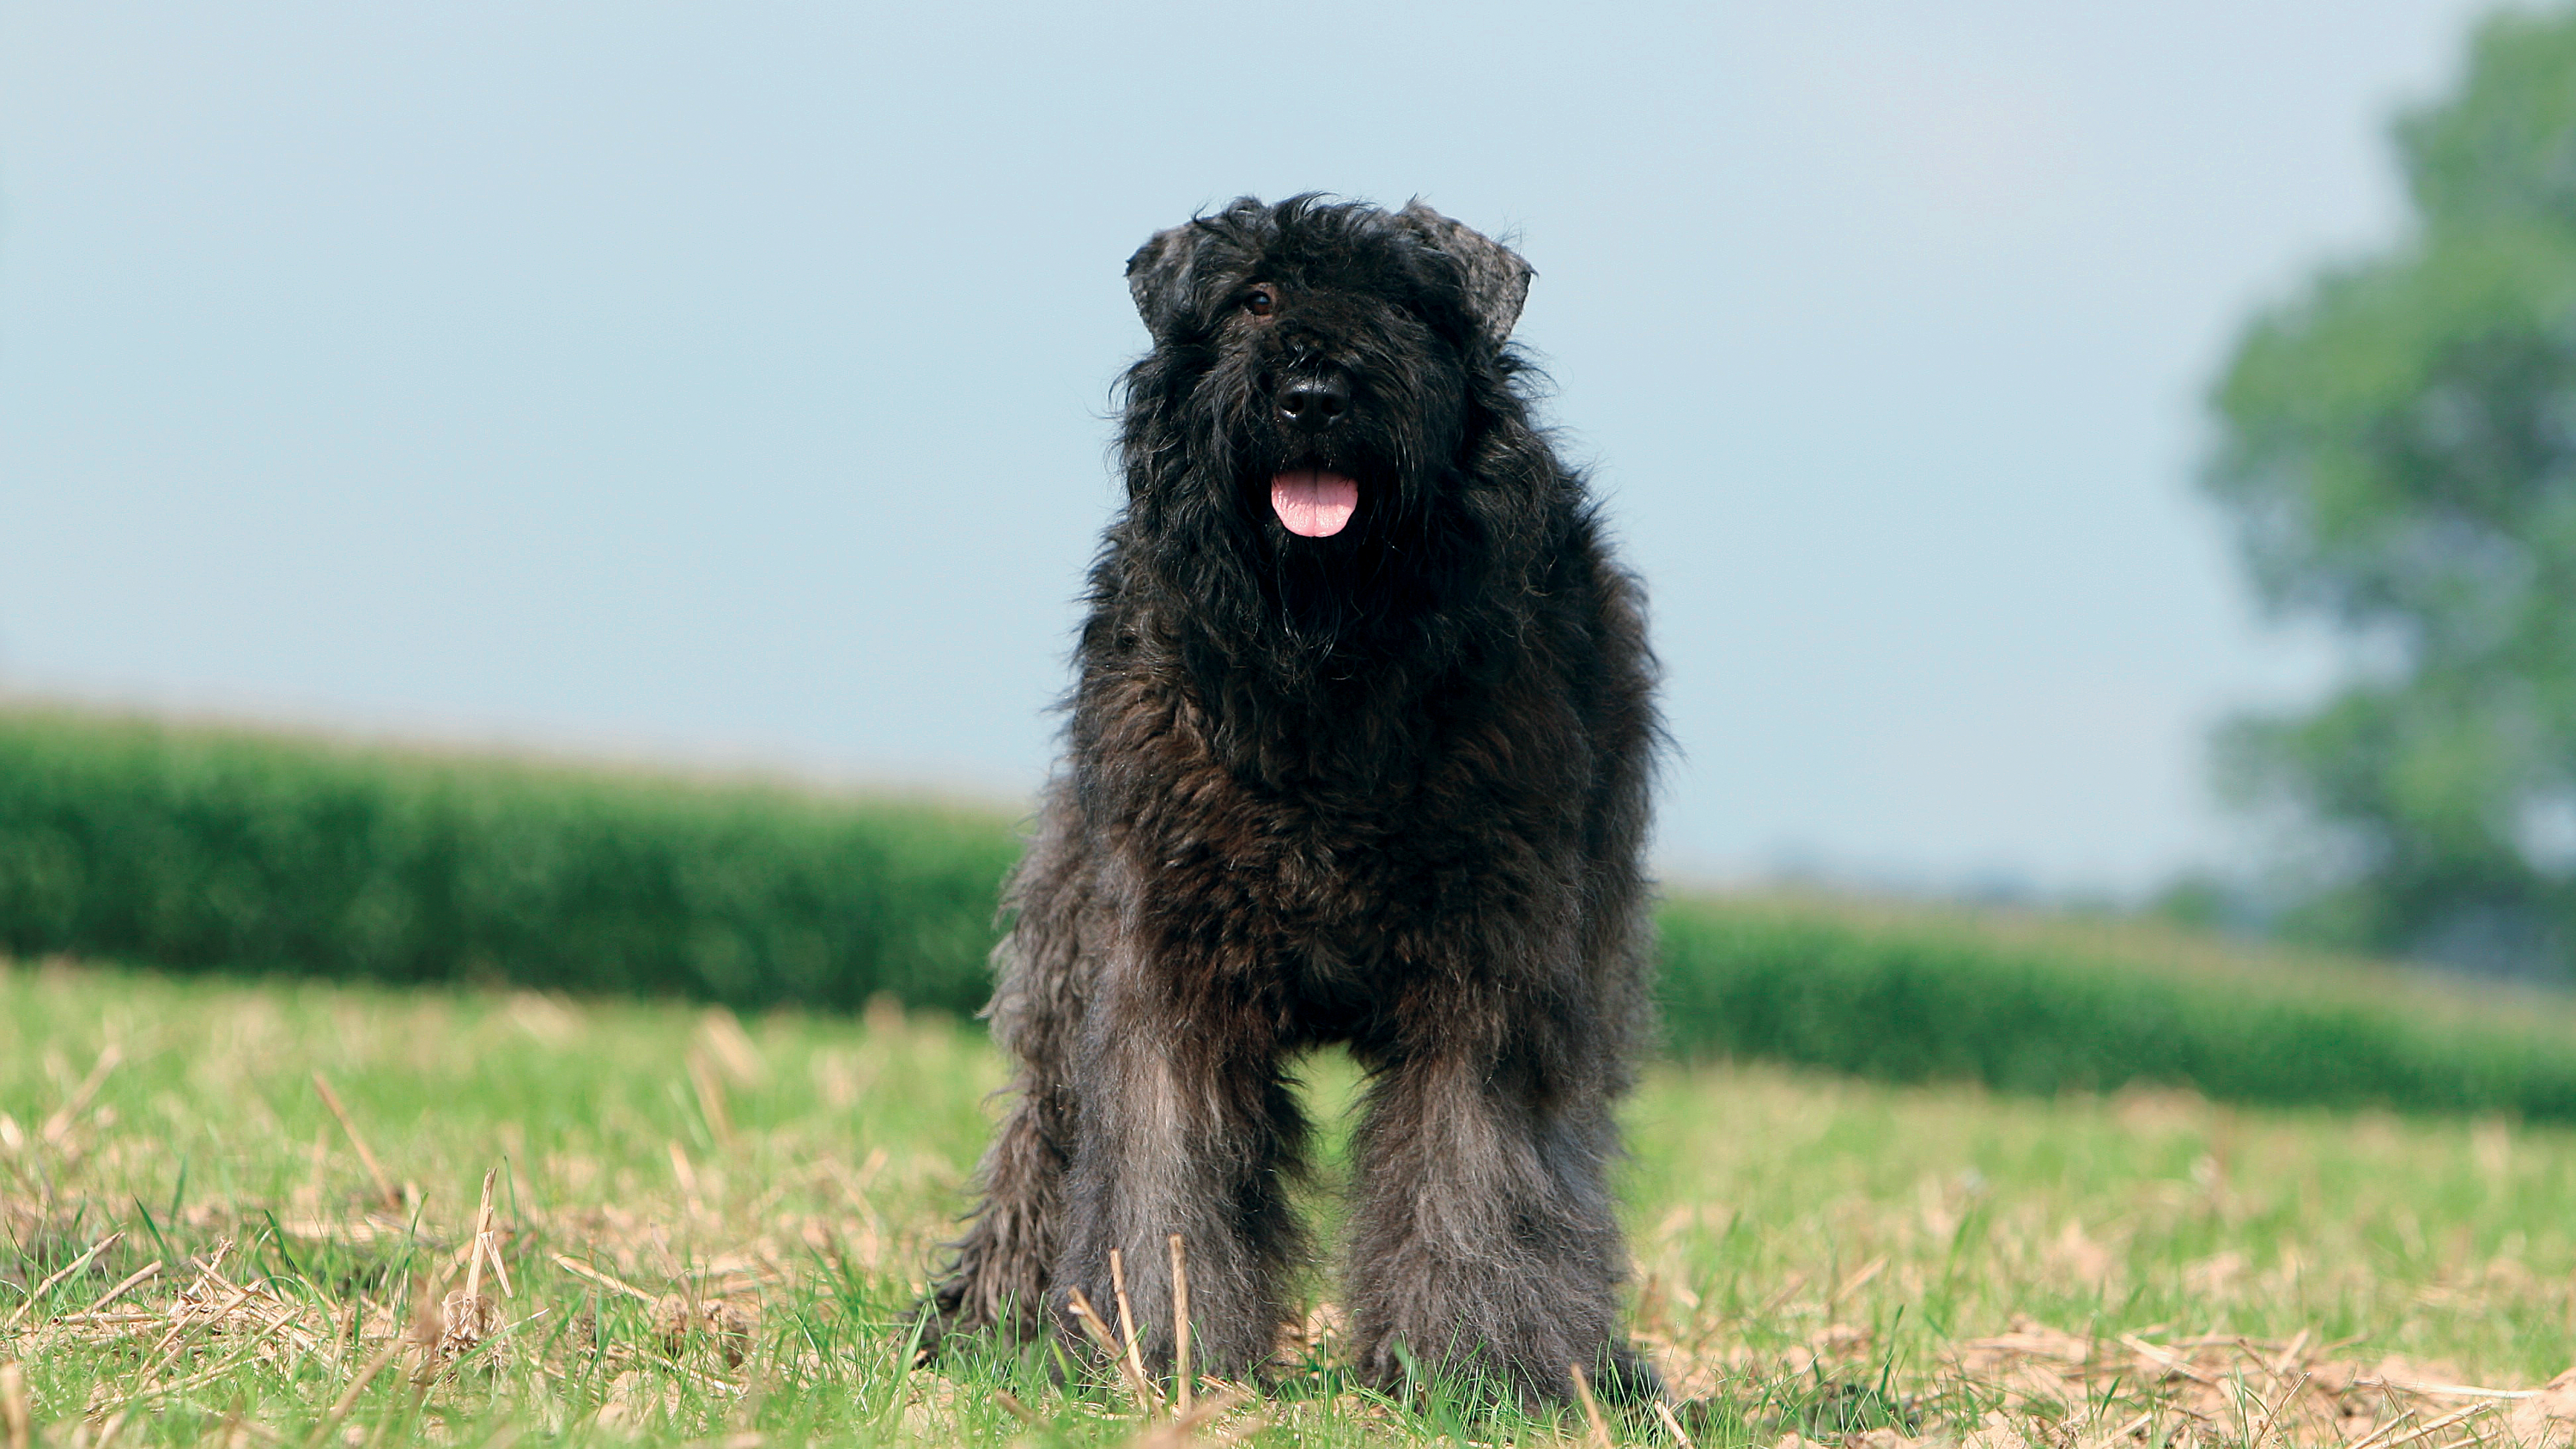 Bouvier de Flandres standing facing camera with its tongue out